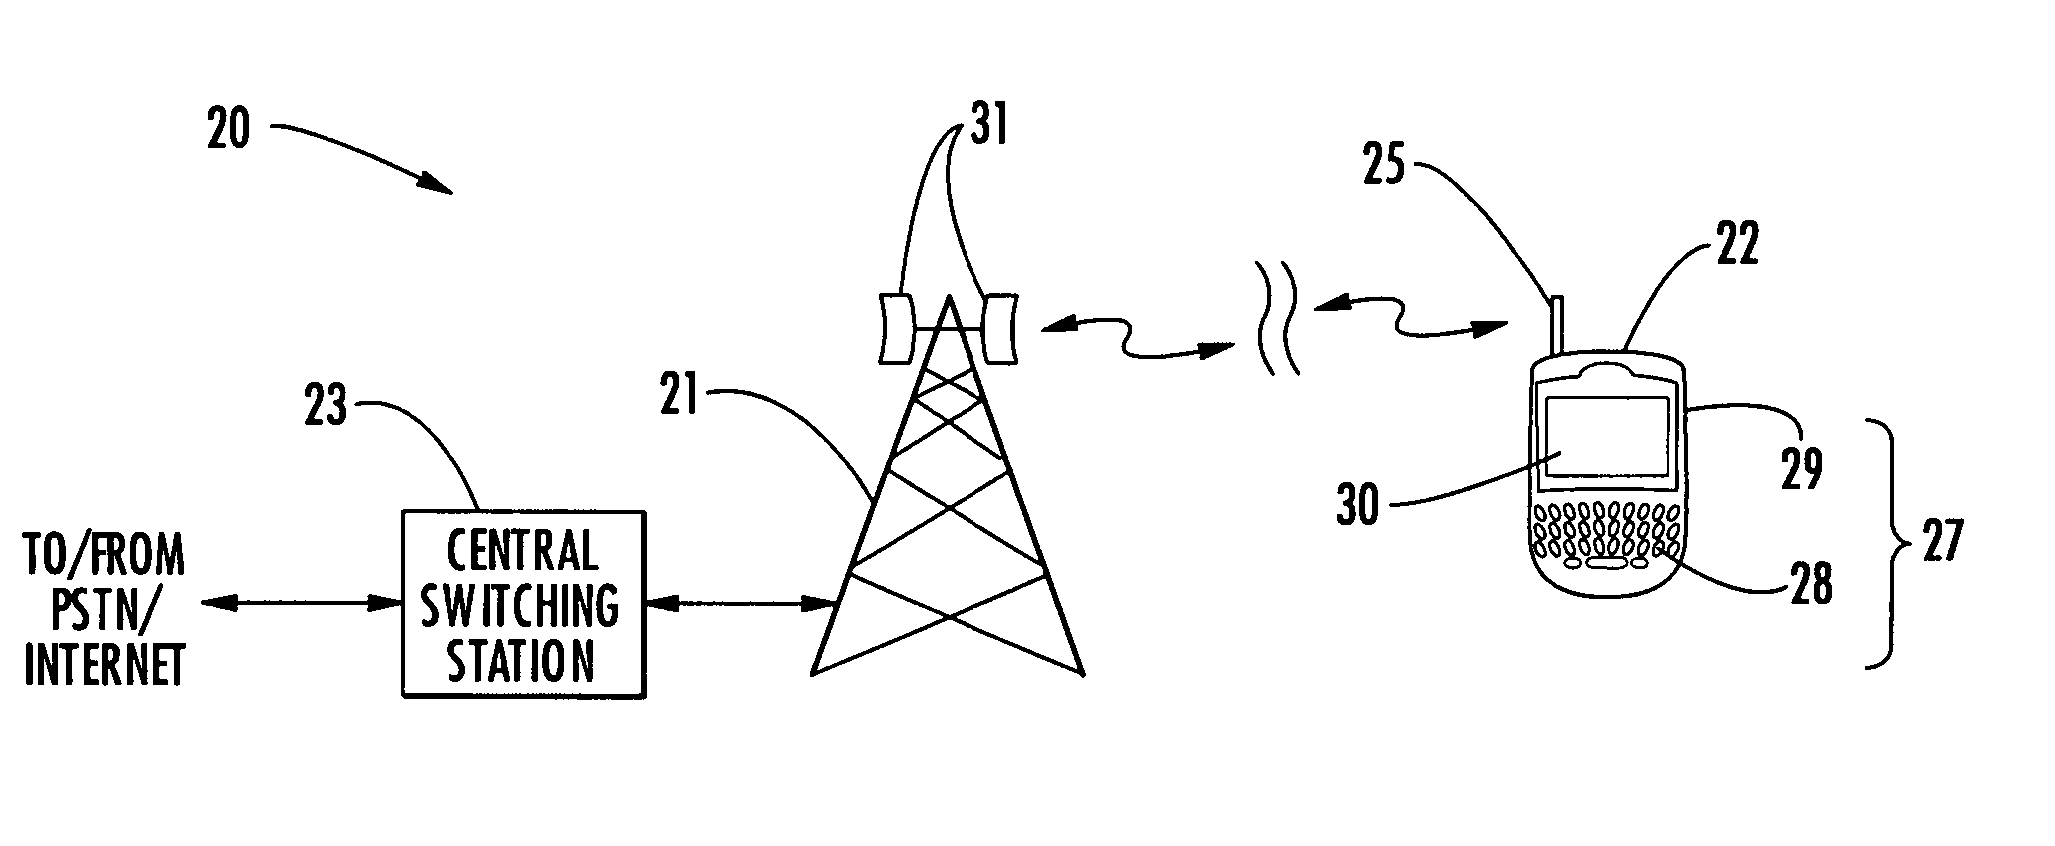 Cellular communications system with mobile cellular device battery saving features based upon quality of service and access denial and related methods